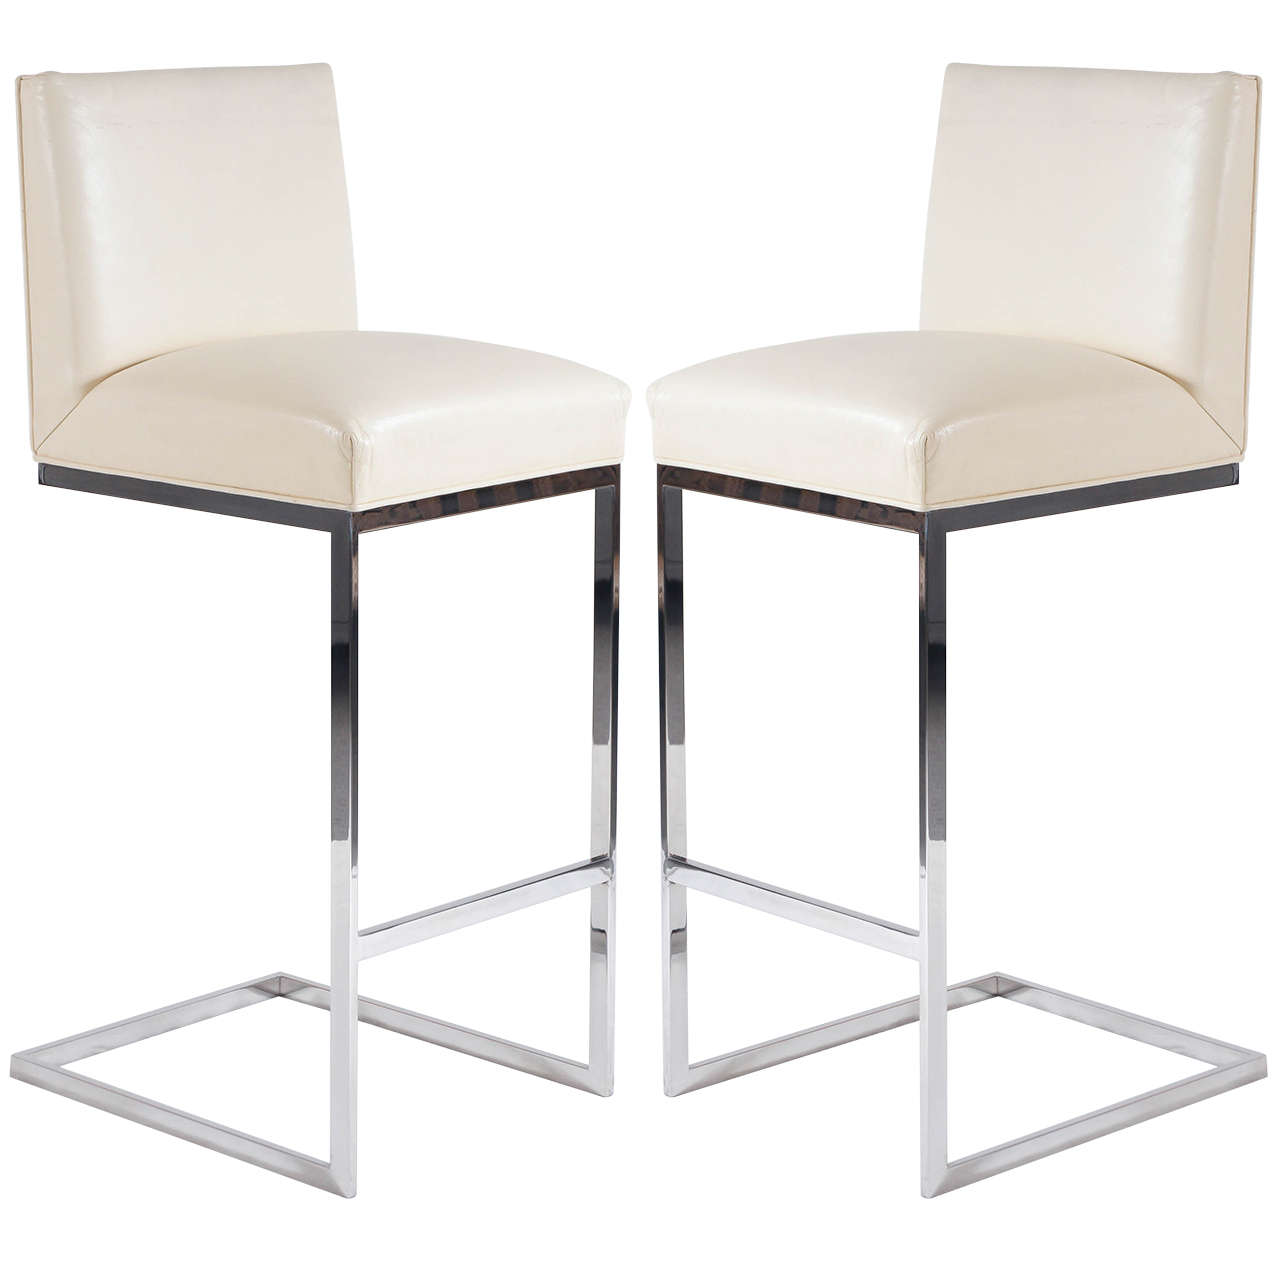 pair of bar stools in leather polished stainless steel by Brueton For Sale